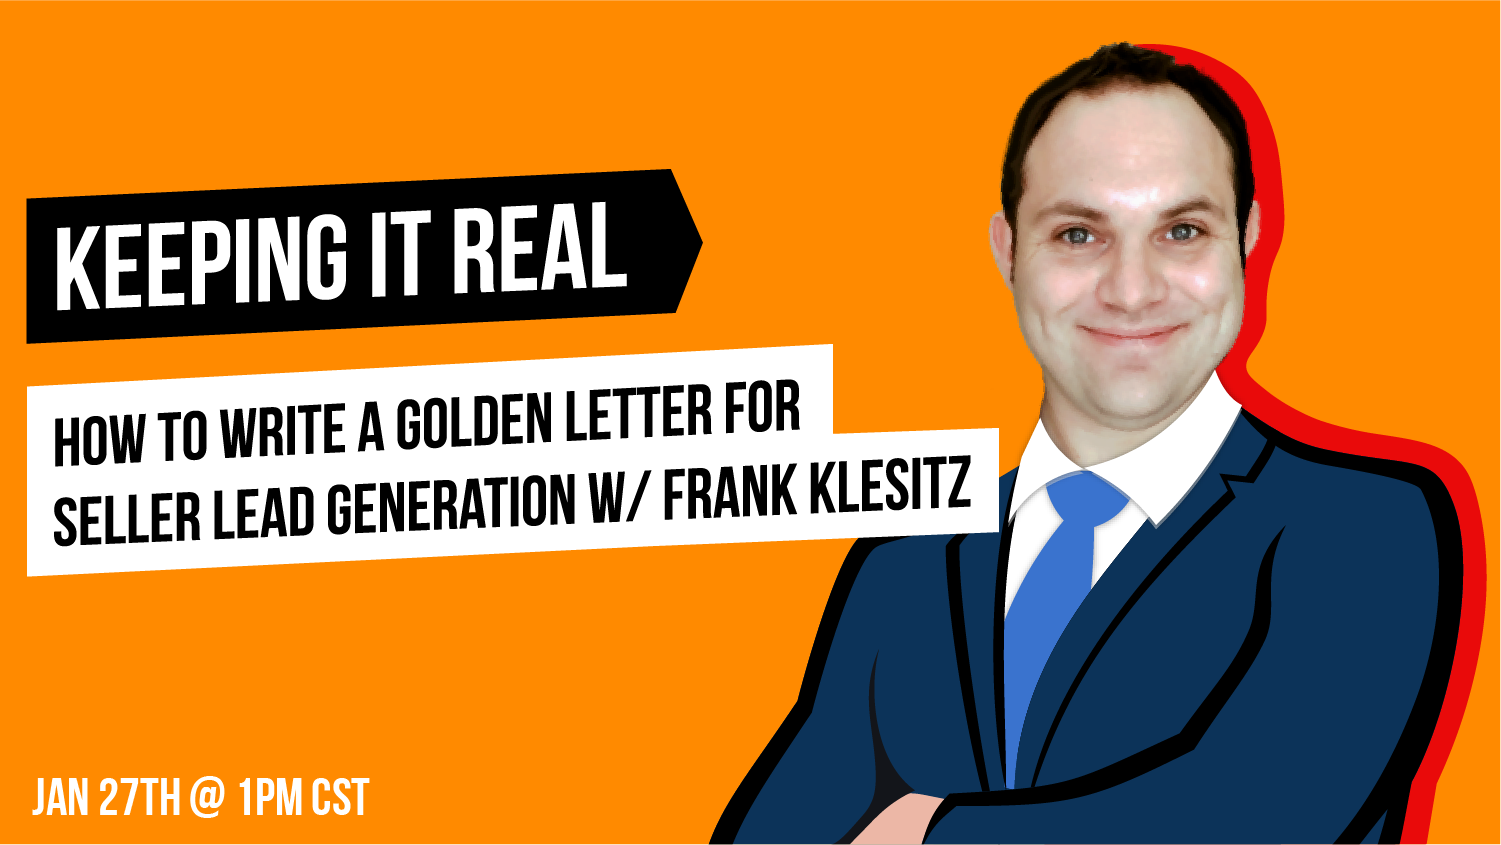 How To Write a Golden Letter for Seller Lead Generation